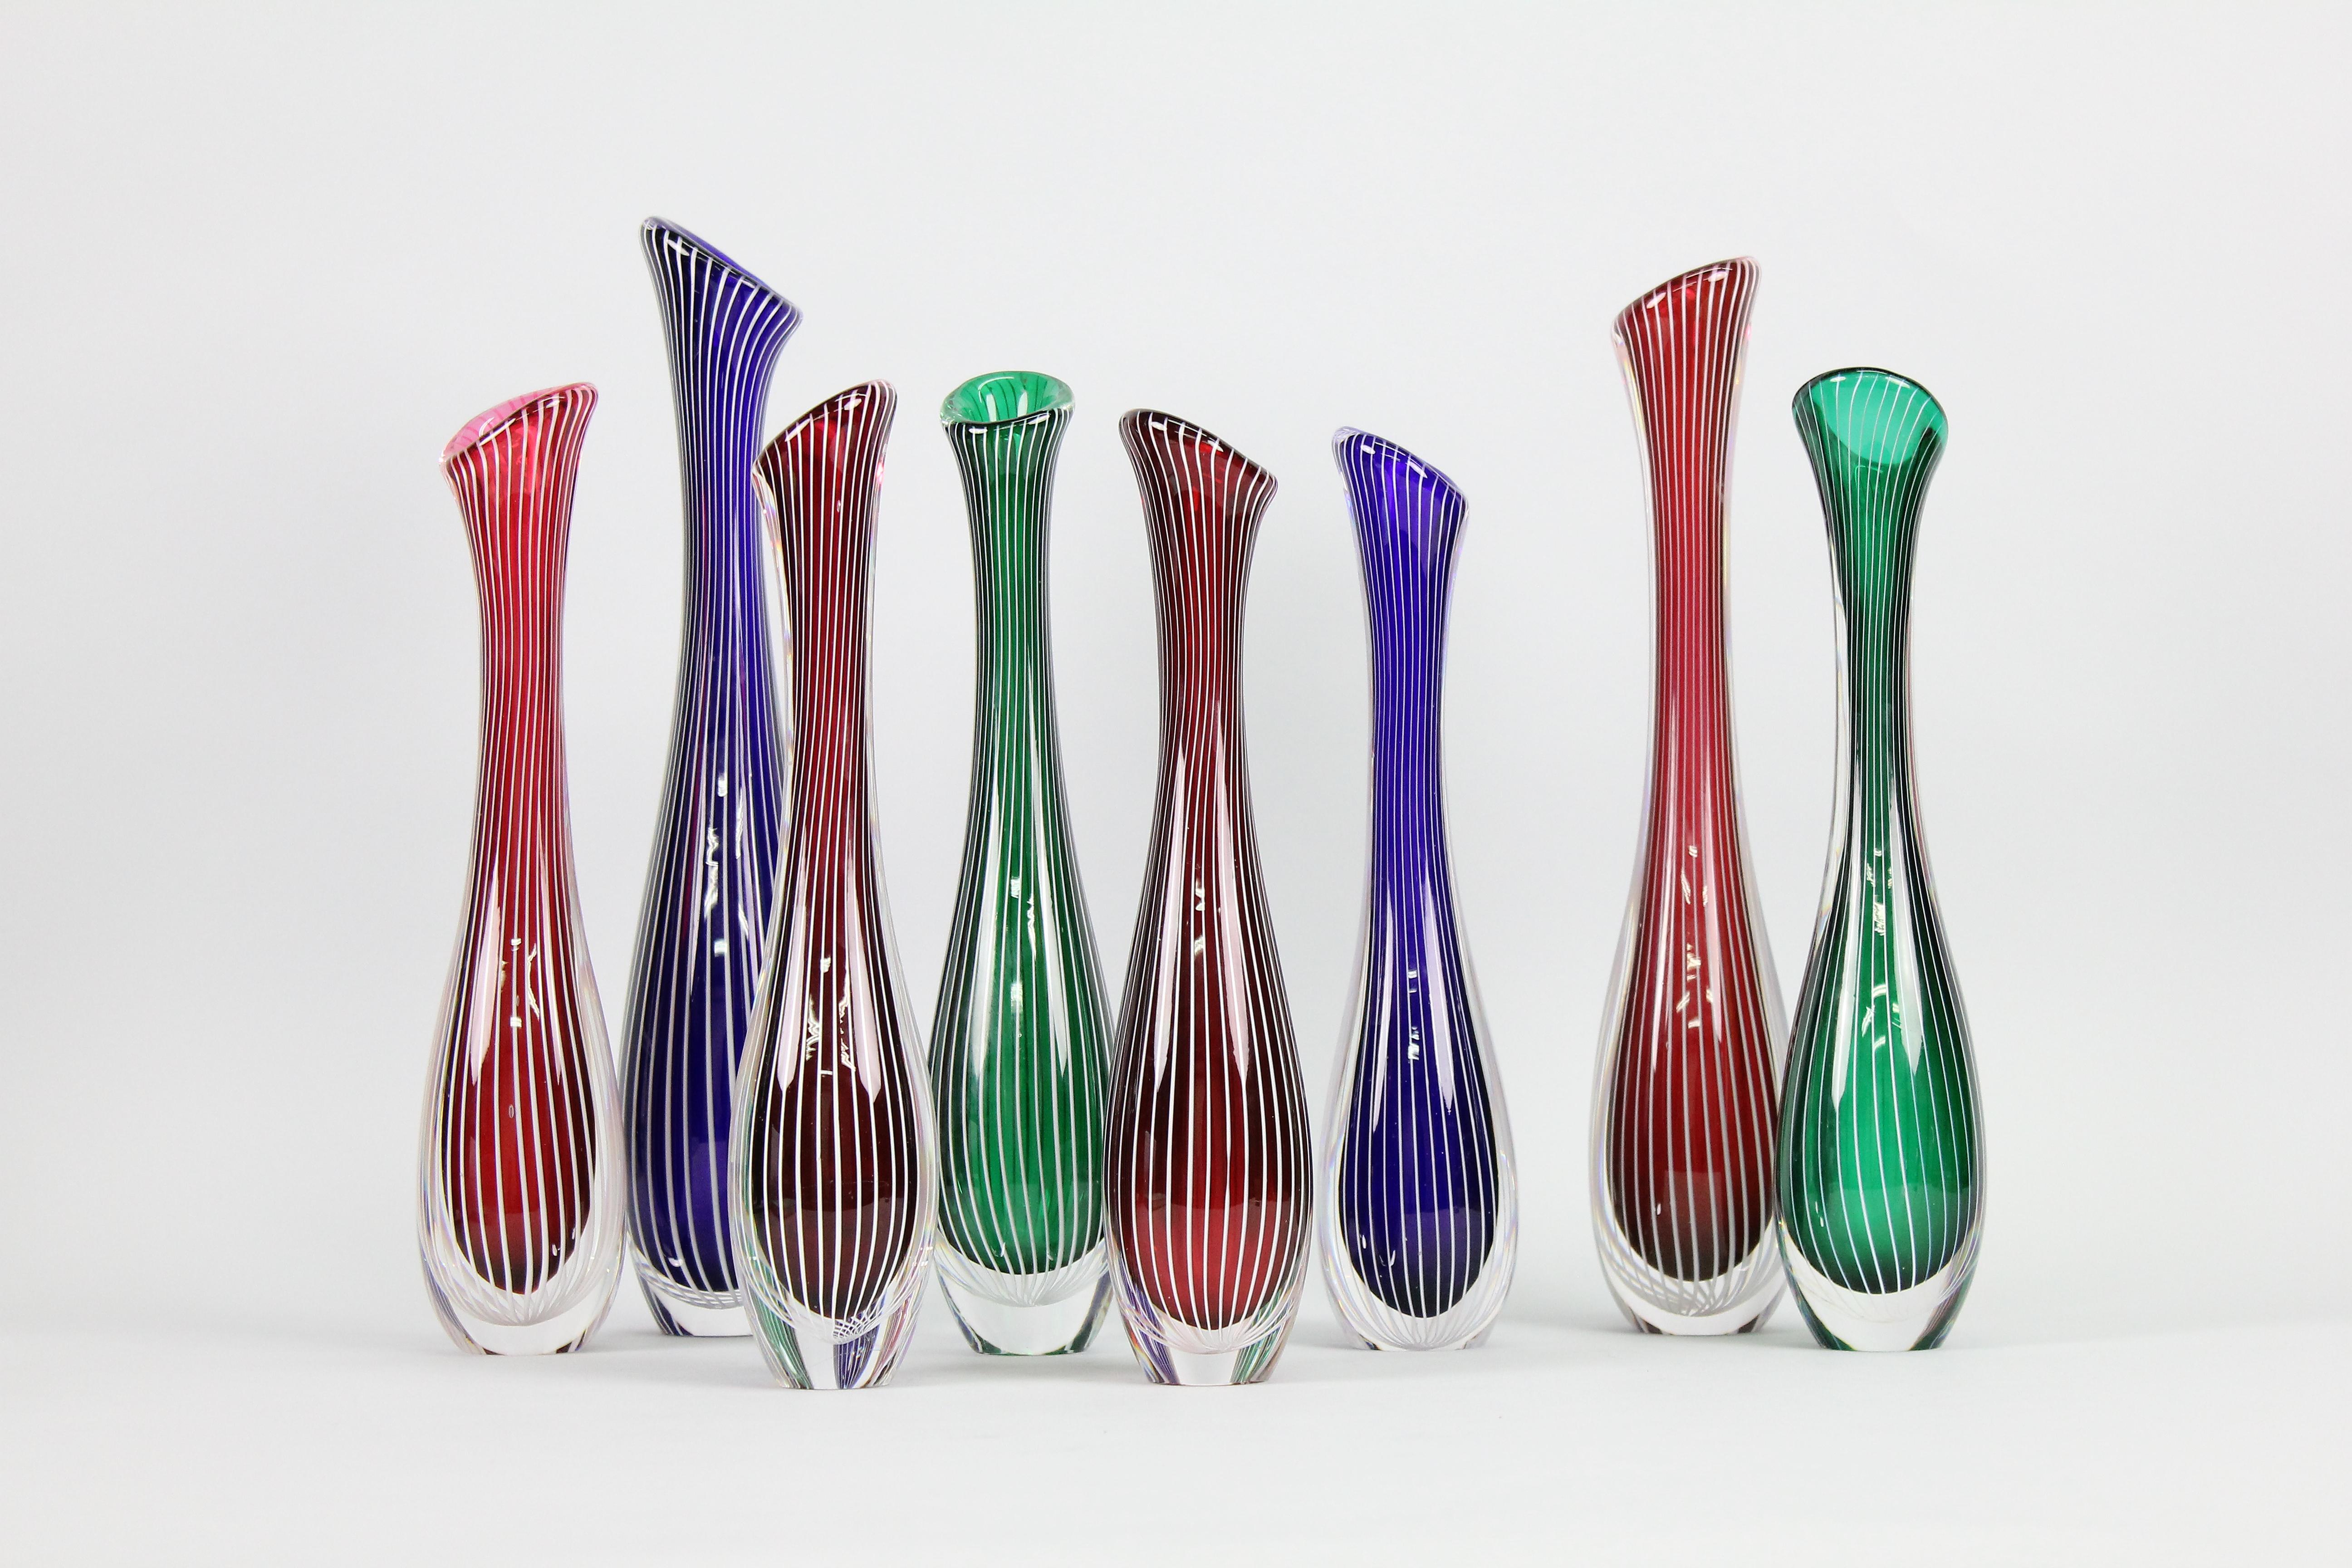 Vintage Zebra Art Glass Vases by Vicke Lindstrand for Kosta 1950s.

A great set of 8 vases in four different colors and in 8 different heights.
Made in blue, red, green, and pink colors with clear glass and white stripes.
Heights 25cm, 25.5cm, 26cm,